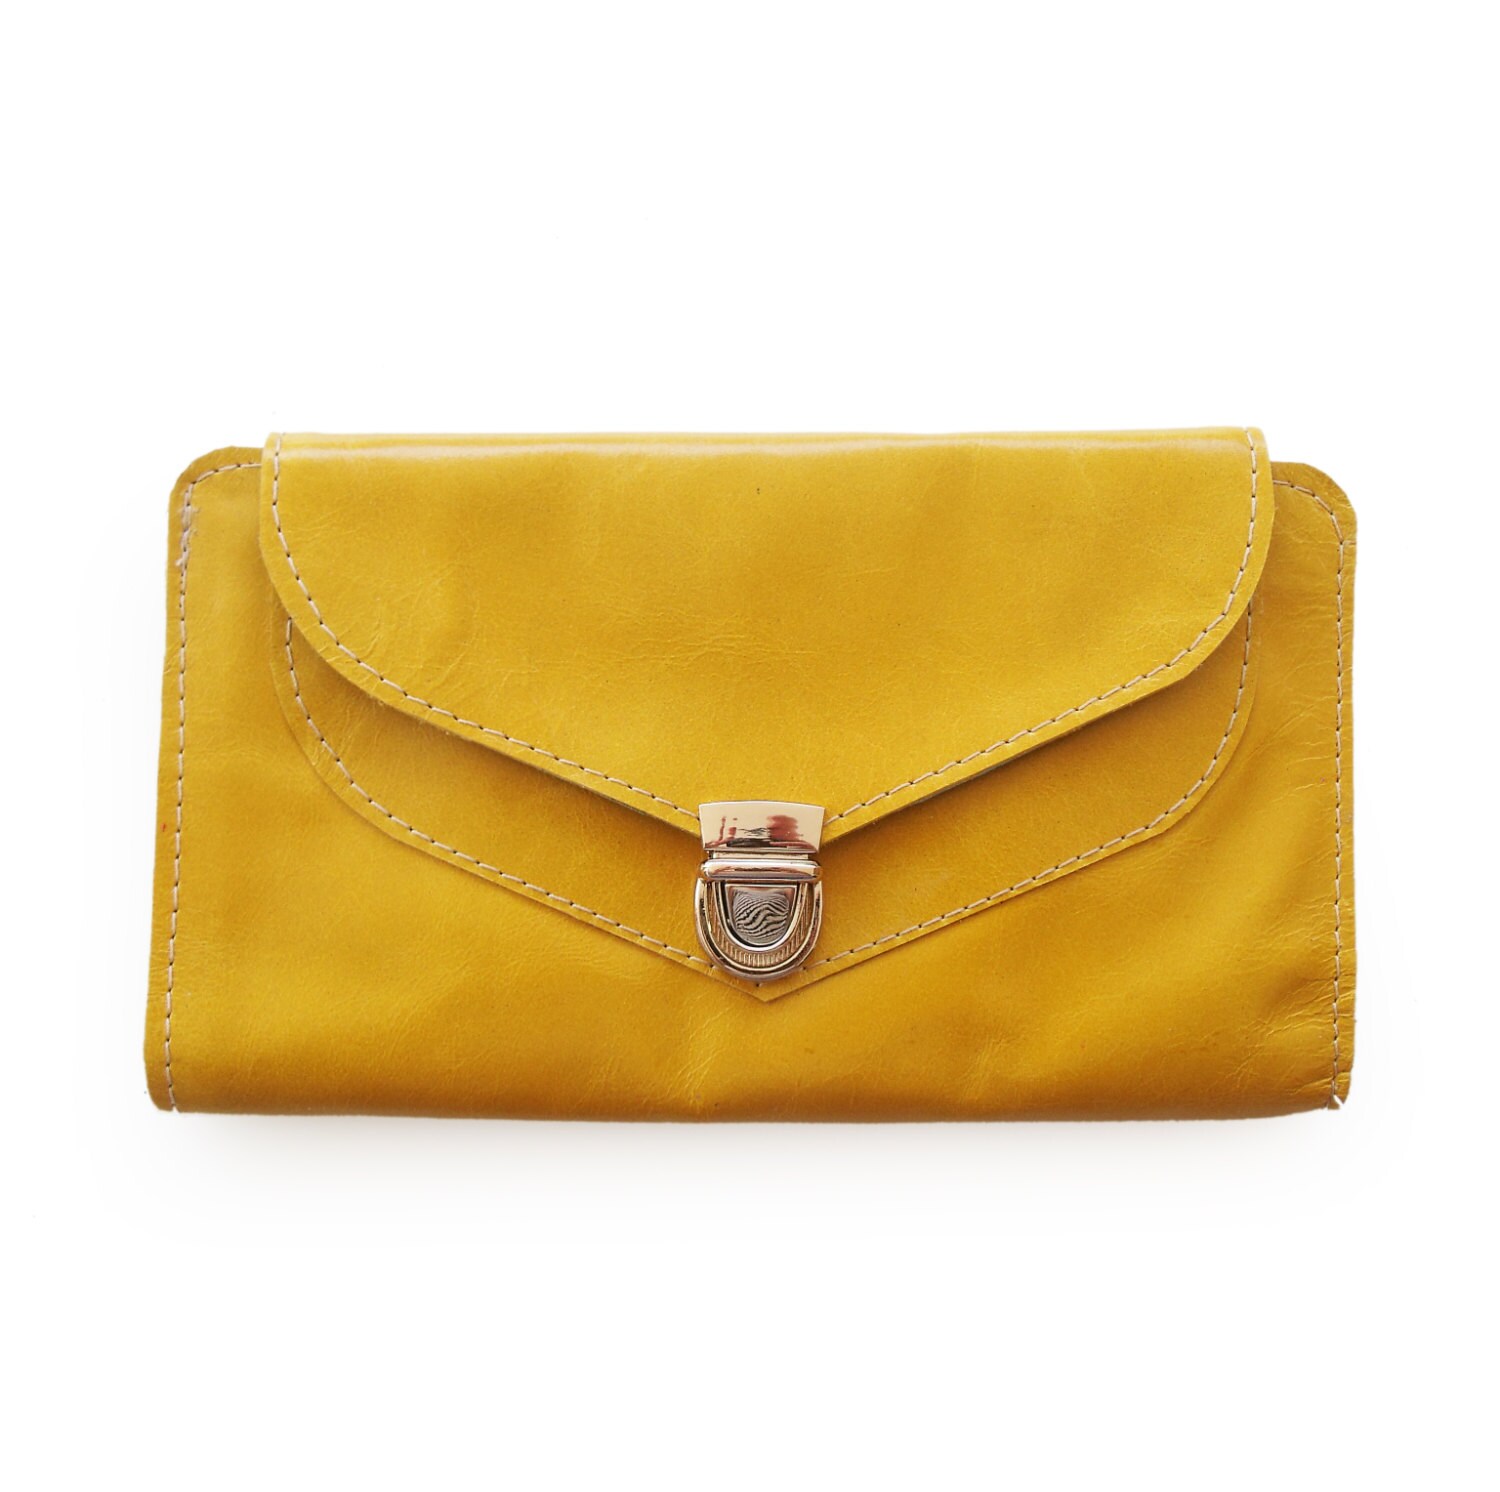 Mustard yellow wallet women's wallet leather by LiberinaBags